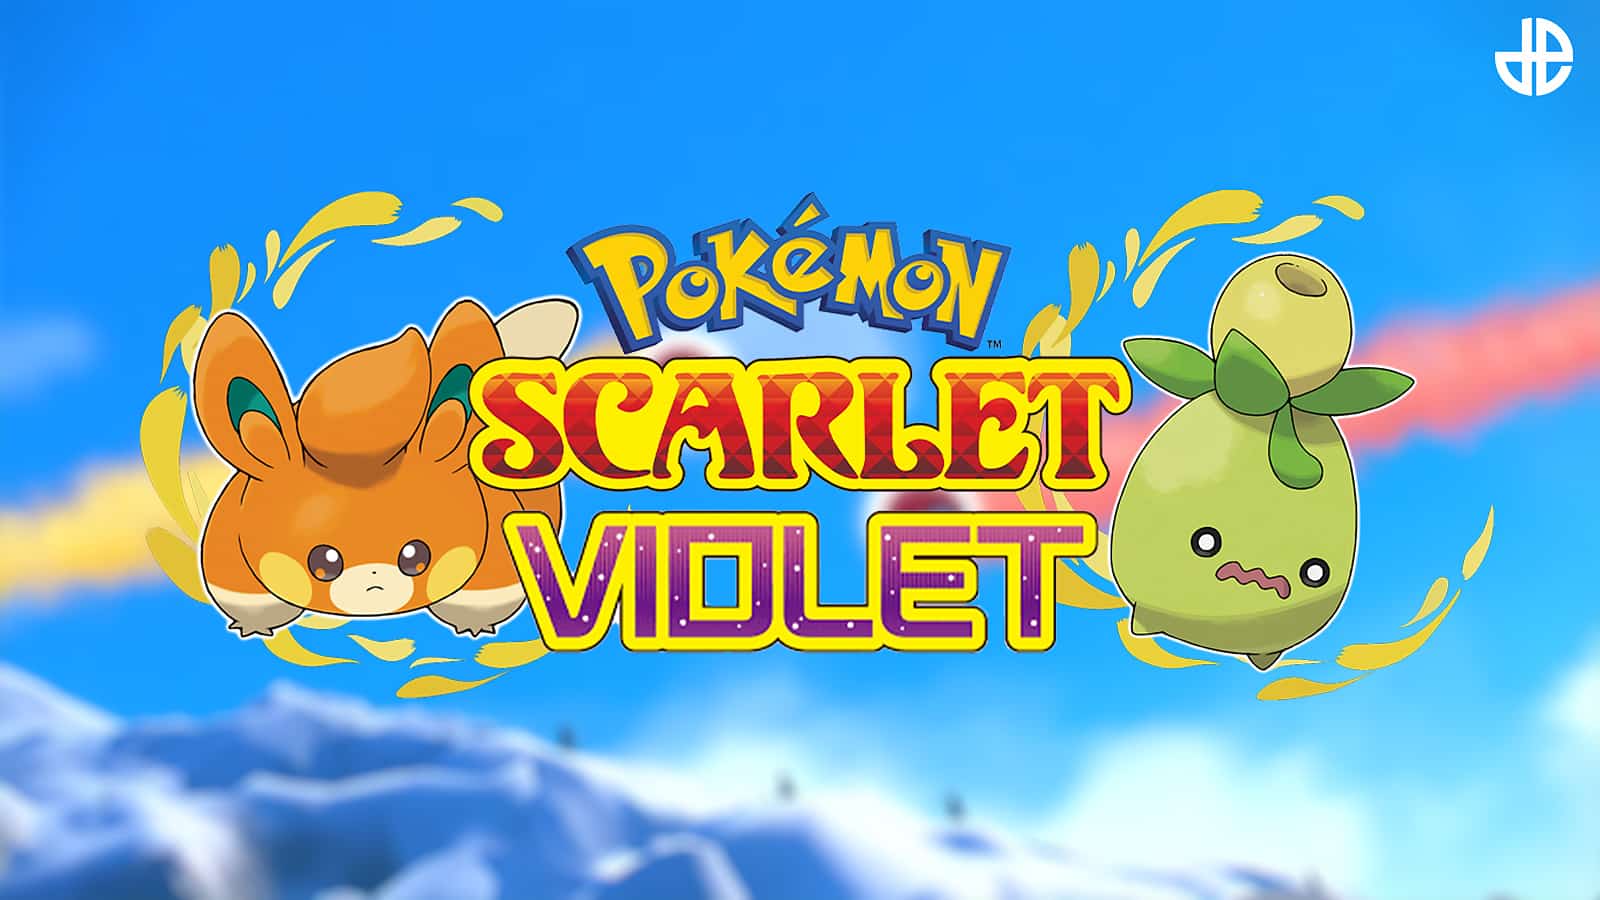 An image of Smoliv and Pawmi with the Pokemon Scarlet and Violet logo